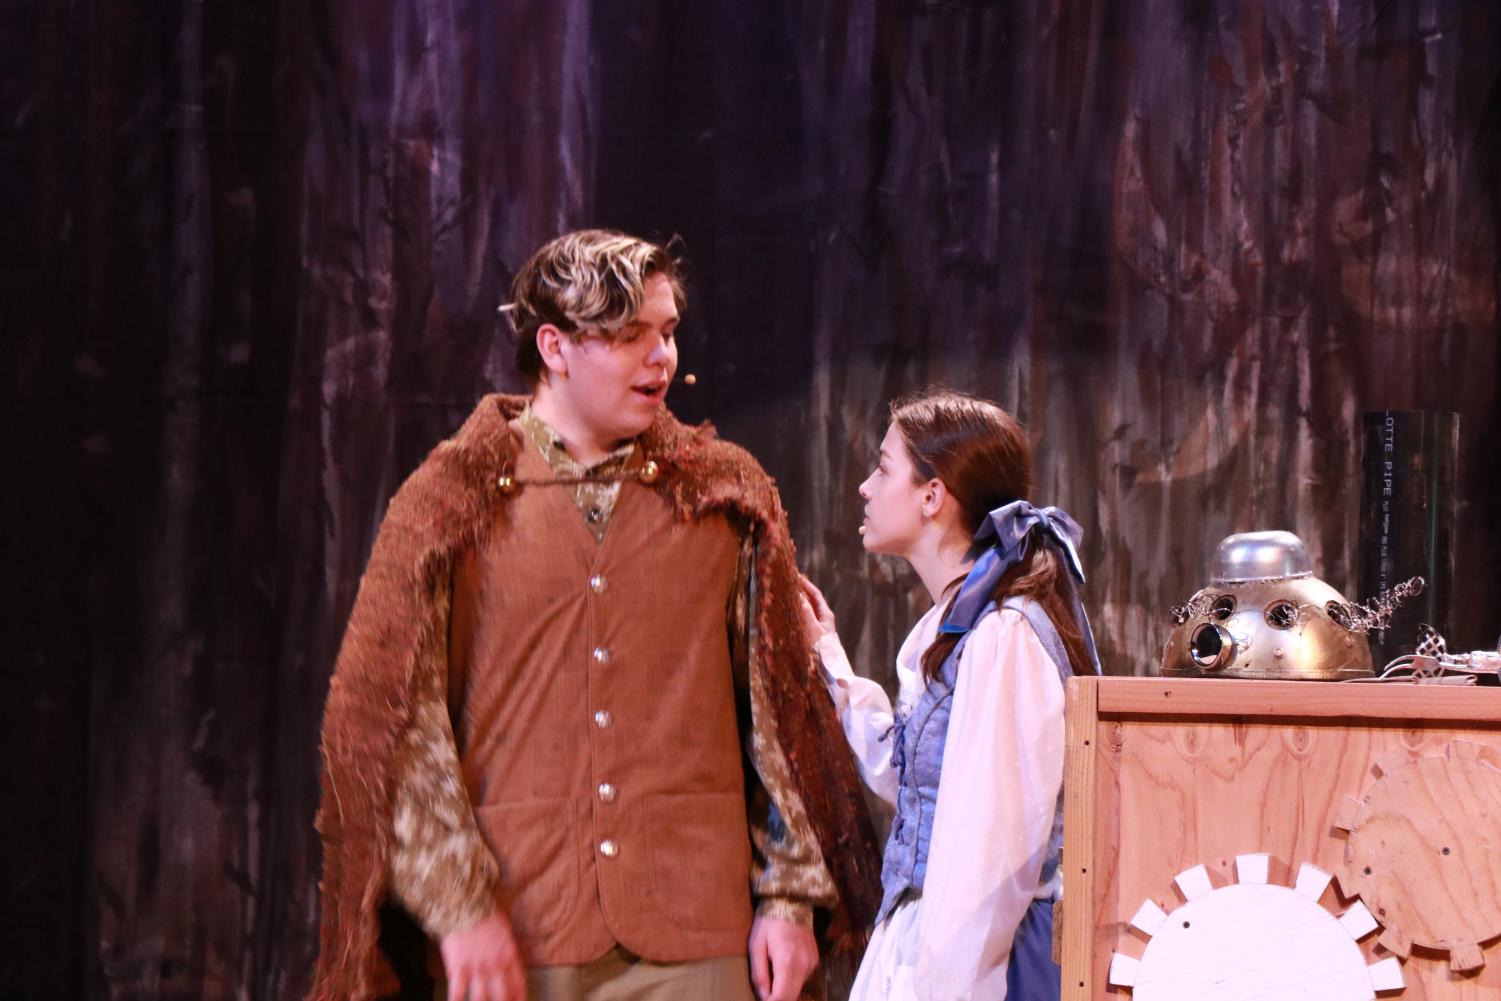 Empathy Magic And True Love Beauty And The Beast Comes To La Salle The La Salle Falconer